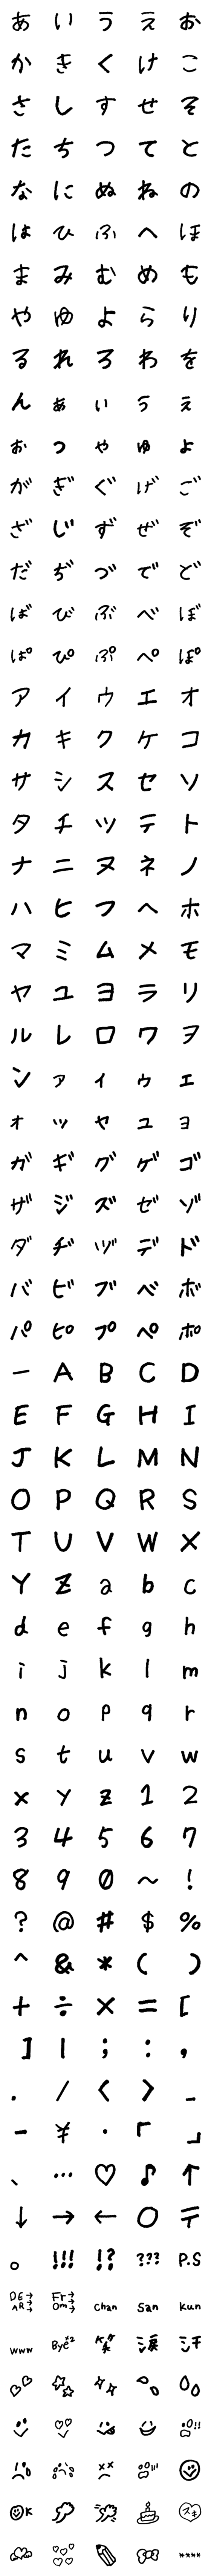 [LINE絵文字]女子の手紙風黒字ペン文字～フルセット～の画像一覧